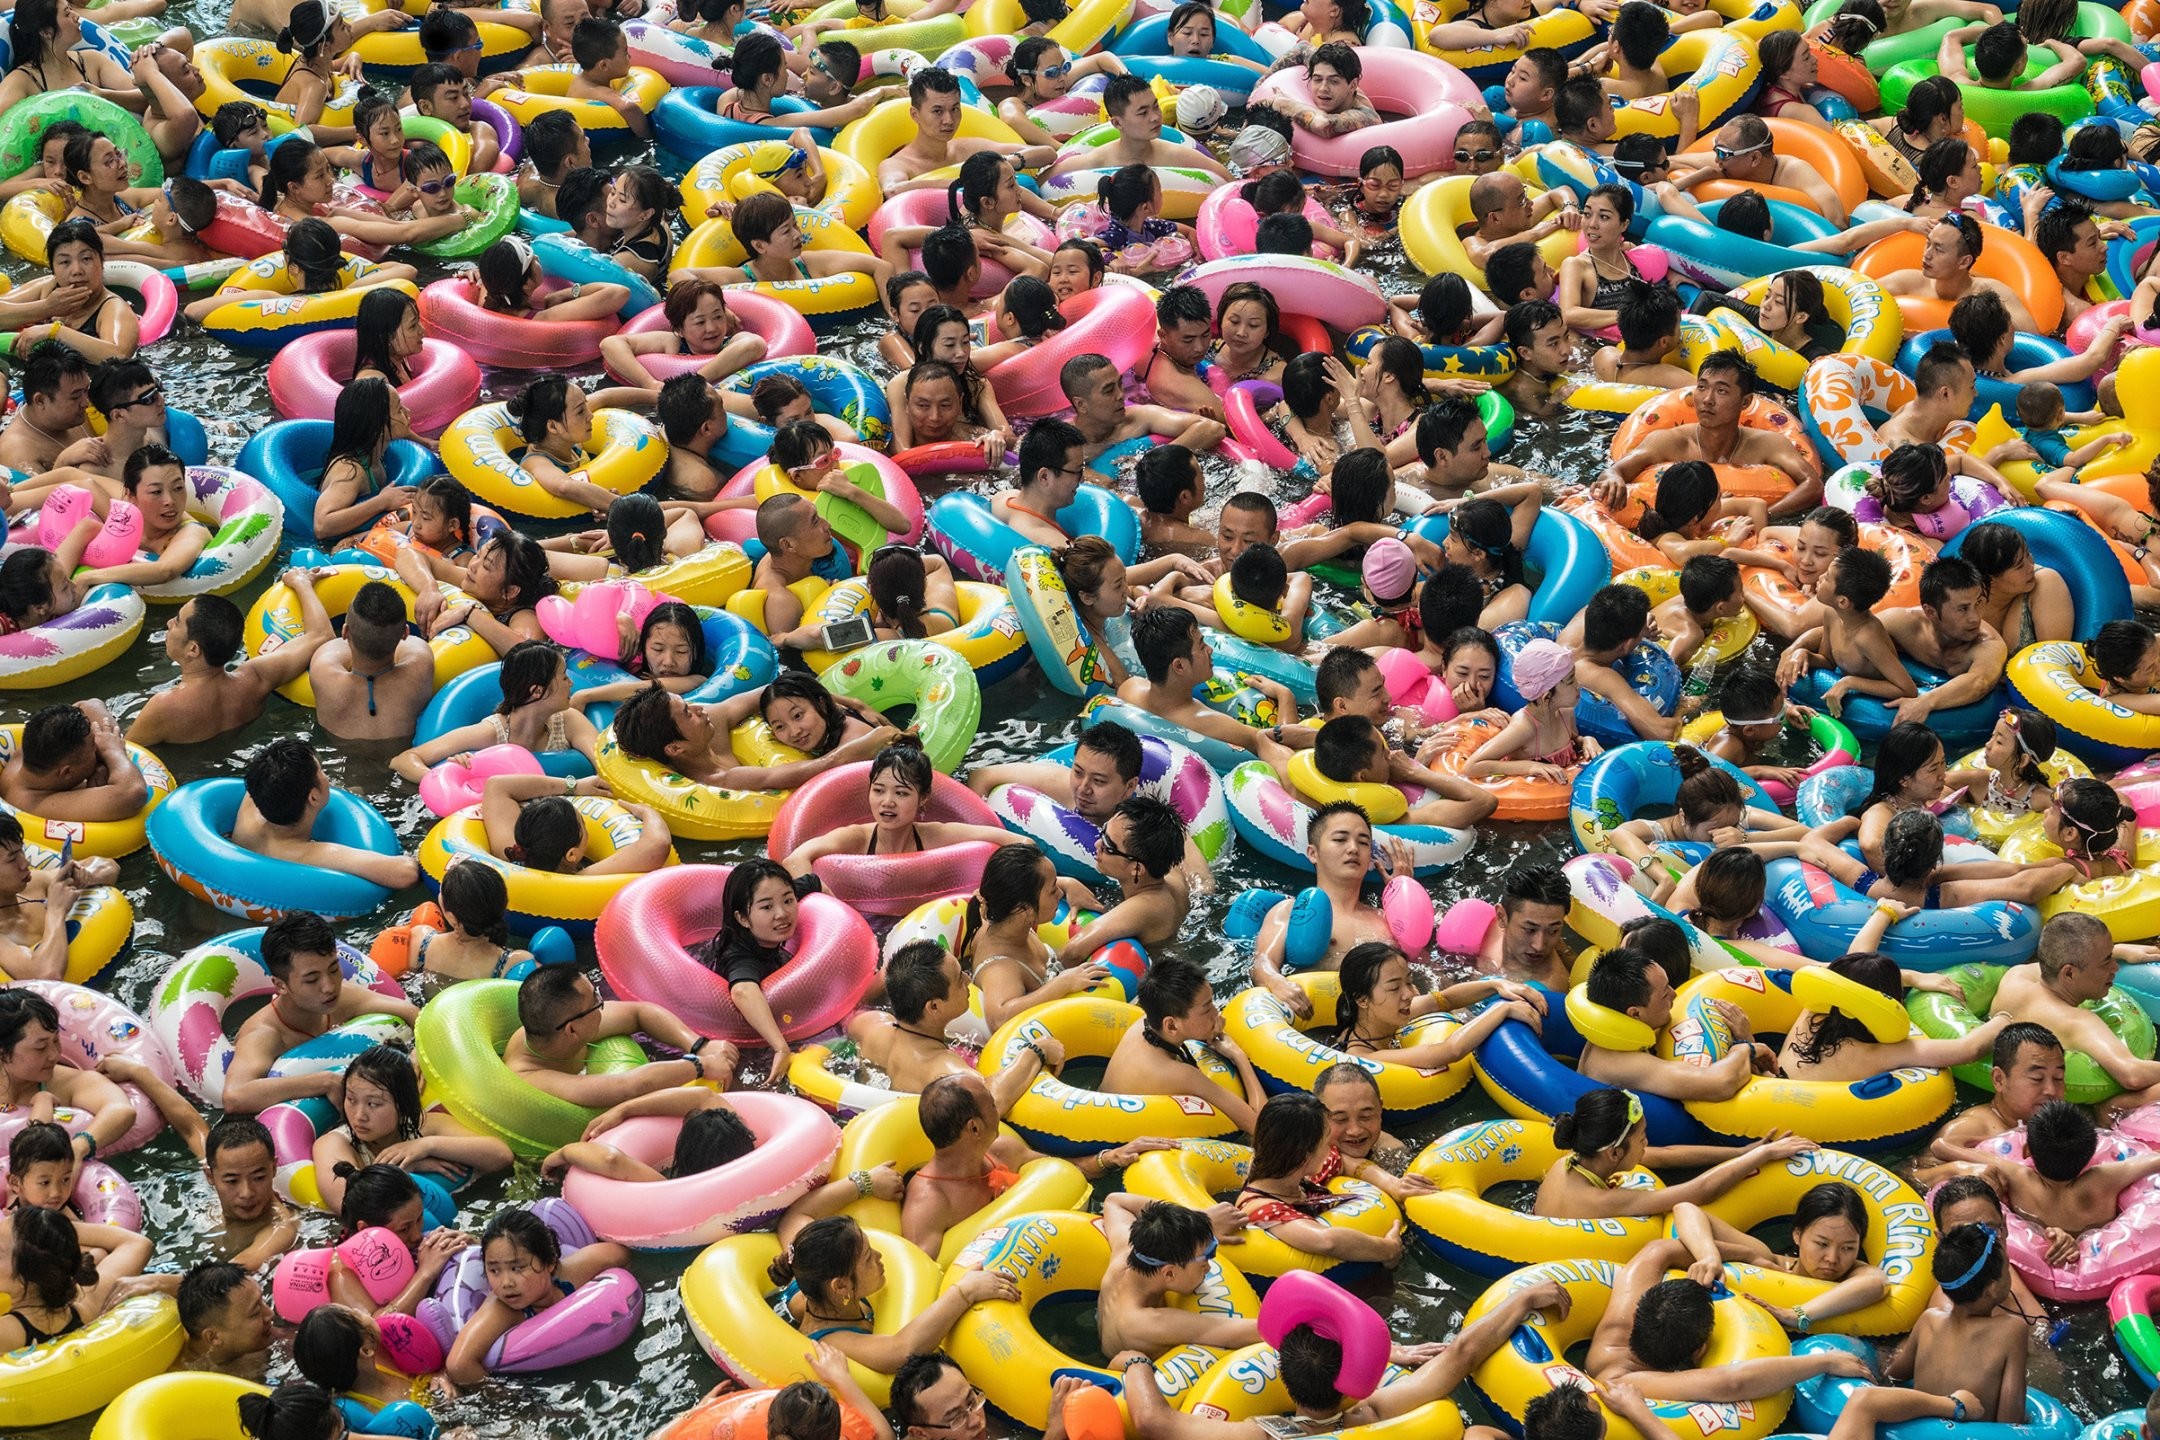 2160x1440 Chinese tourists swim in a lake called the "Dead Sea of China" at a